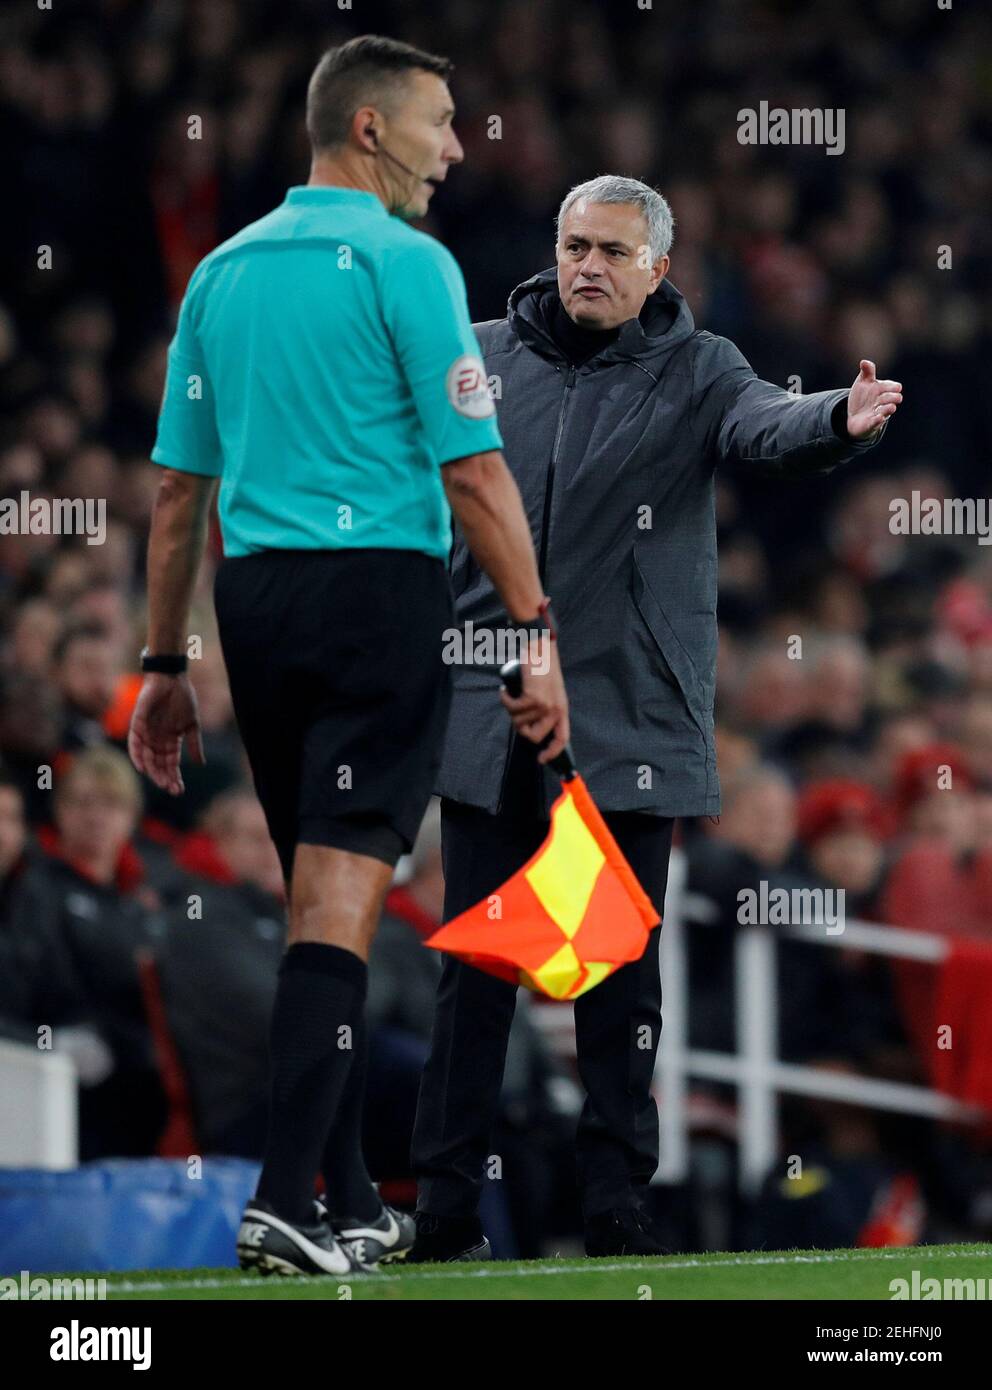 Soccer Football - Premier League - Arsenal vs Manchester United - Emirates Stadium, London, Britain - December 2, 2017   Manchester United manager Jose Mourinho remonstrates with an assistant referee   REUTERS/Eddie Keogh    EDITORIAL USE ONLY. No use with unauthorized audio, video, data, fixture lists, club/league logos or 'live' services. Online in-match use limited to 75 images, no video emulation. No use in betting, games or single club/league/player publications. Please contact your account representative for further details. Stock Photo